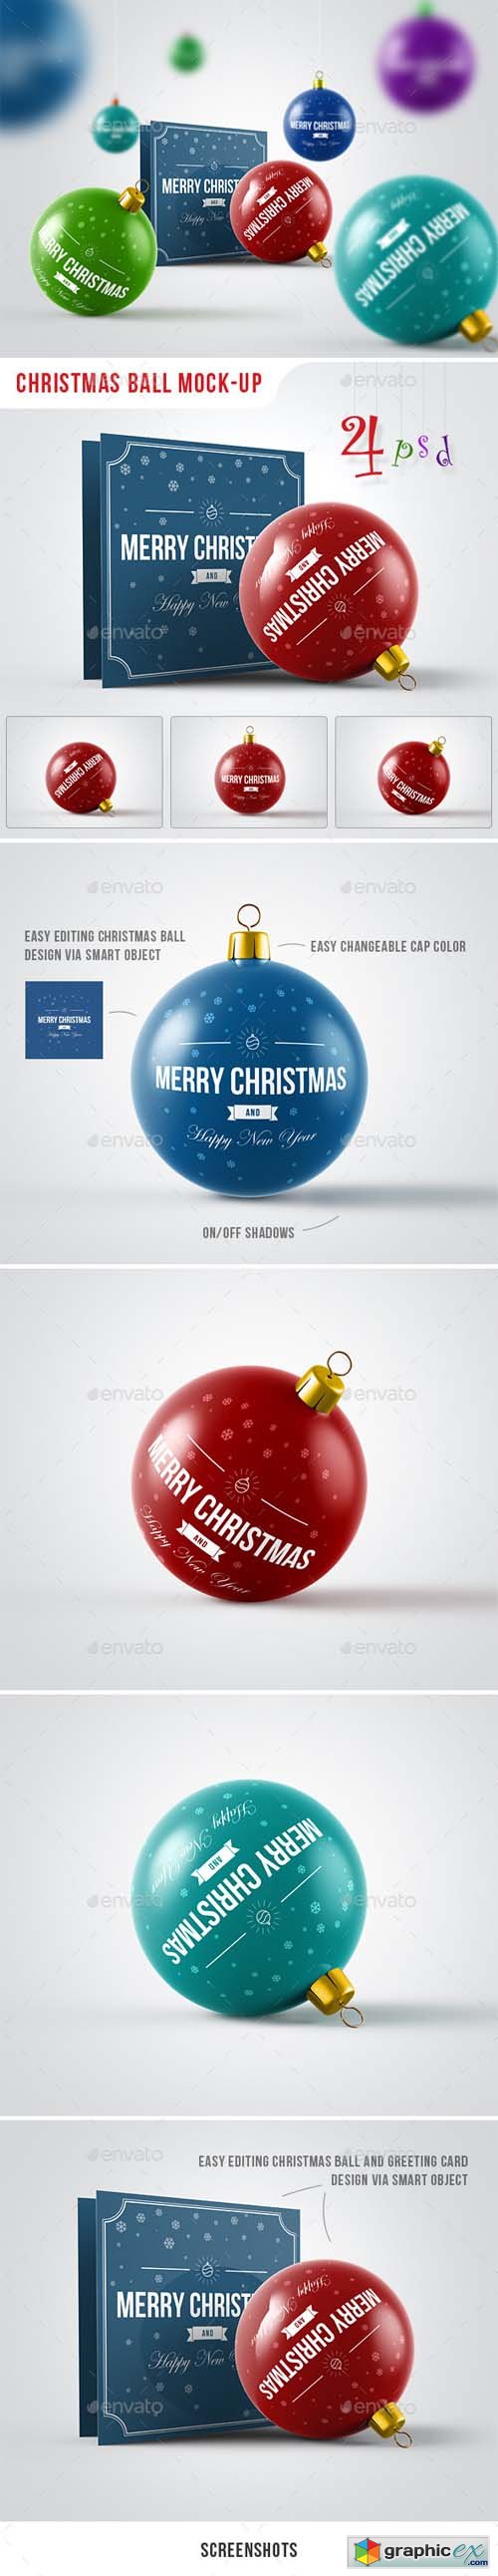 Download Christmas Ball Mock Up Free Download Vector Stock Image Photoshop Icon PSD Mockup Templates